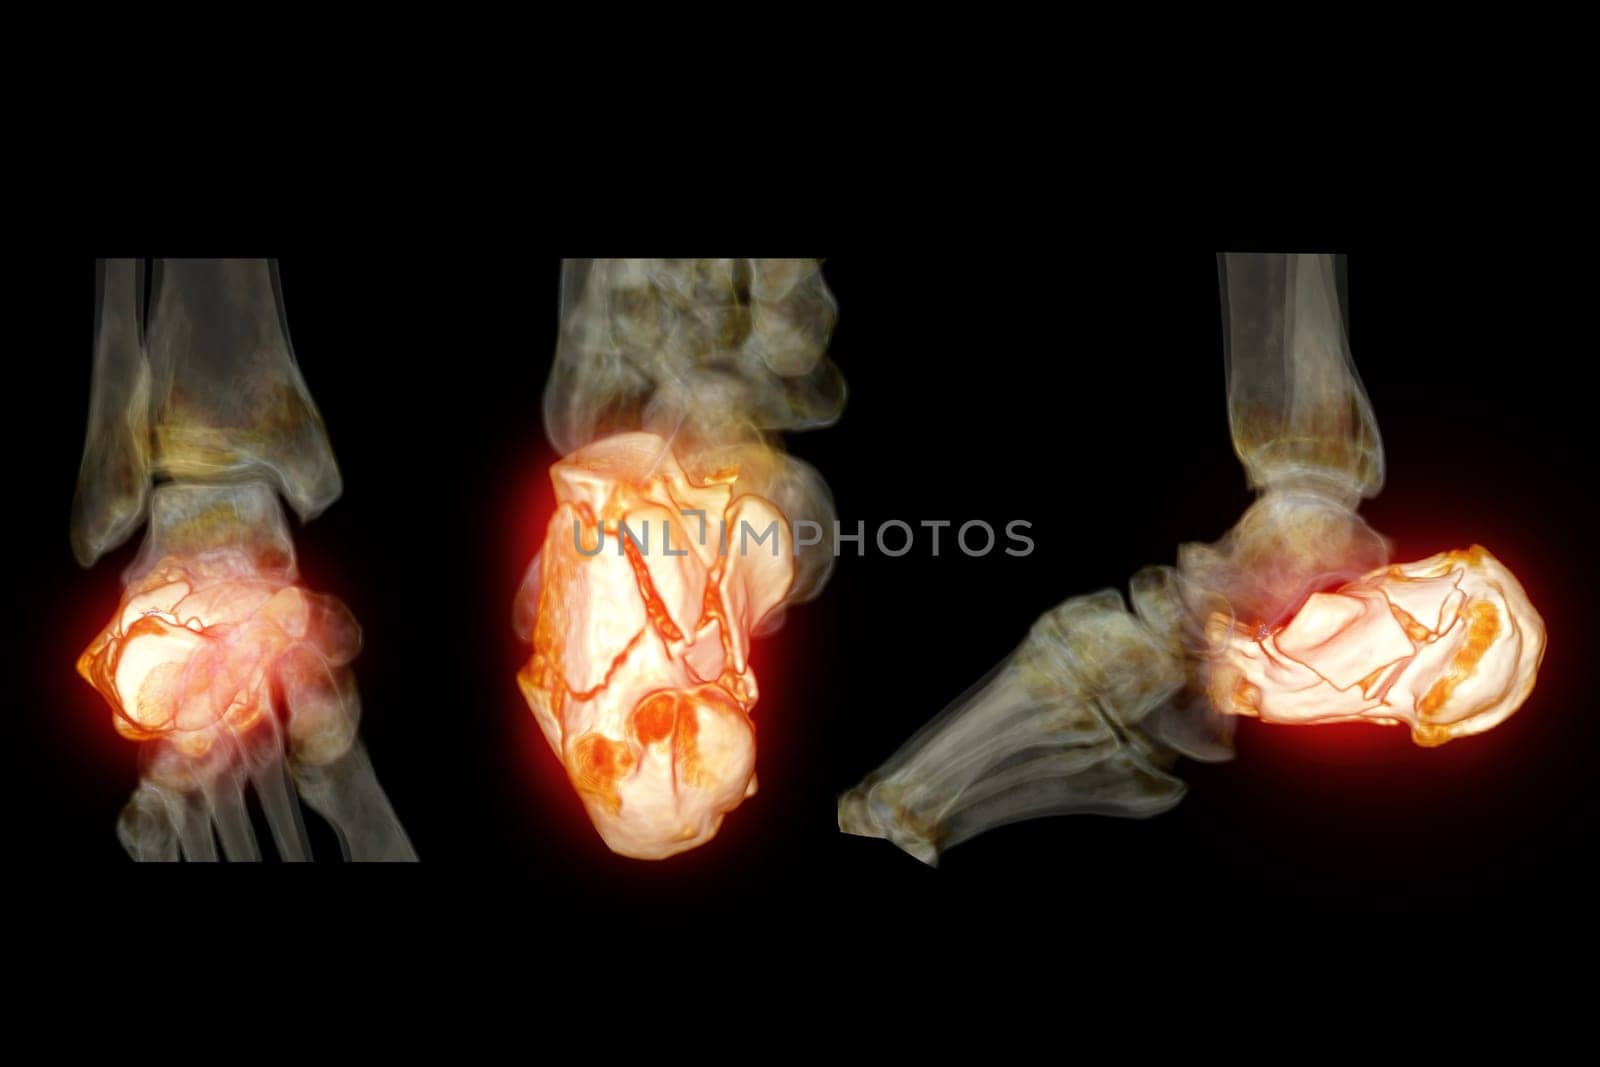 CT Scan ankle joint with  3d rendering of calcaneus bone showing Calcaneus (Heel Bone) Fractures. by samunella